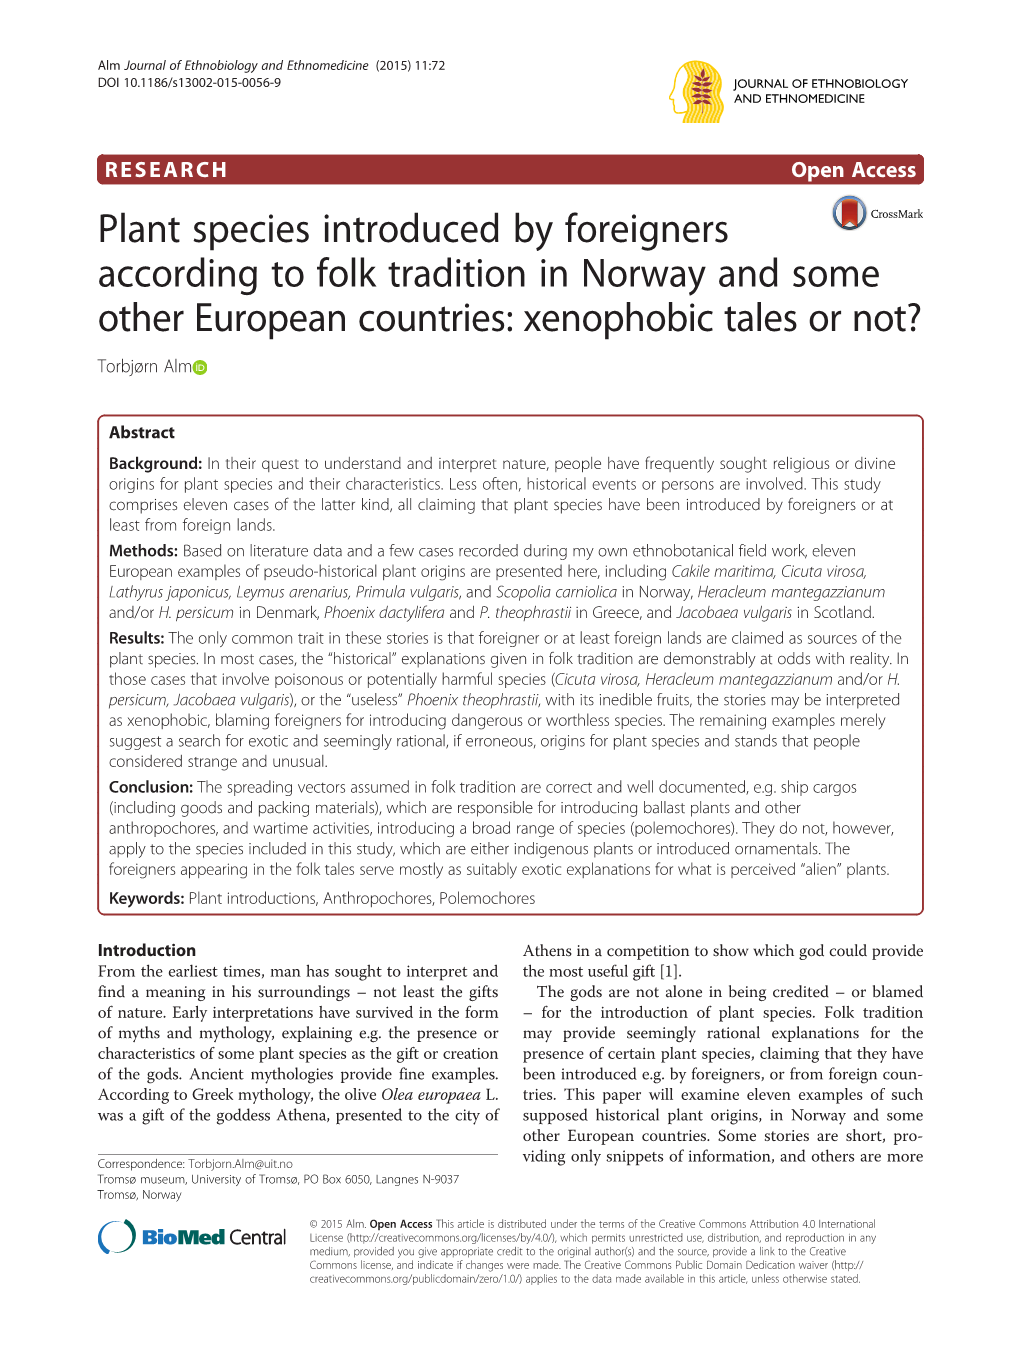 Plant Species Introduced by Foreigners According to Folk Tradition in Norway and Some Other European Countries: Xenophobic Tales Or Not? Torbjørn Alm